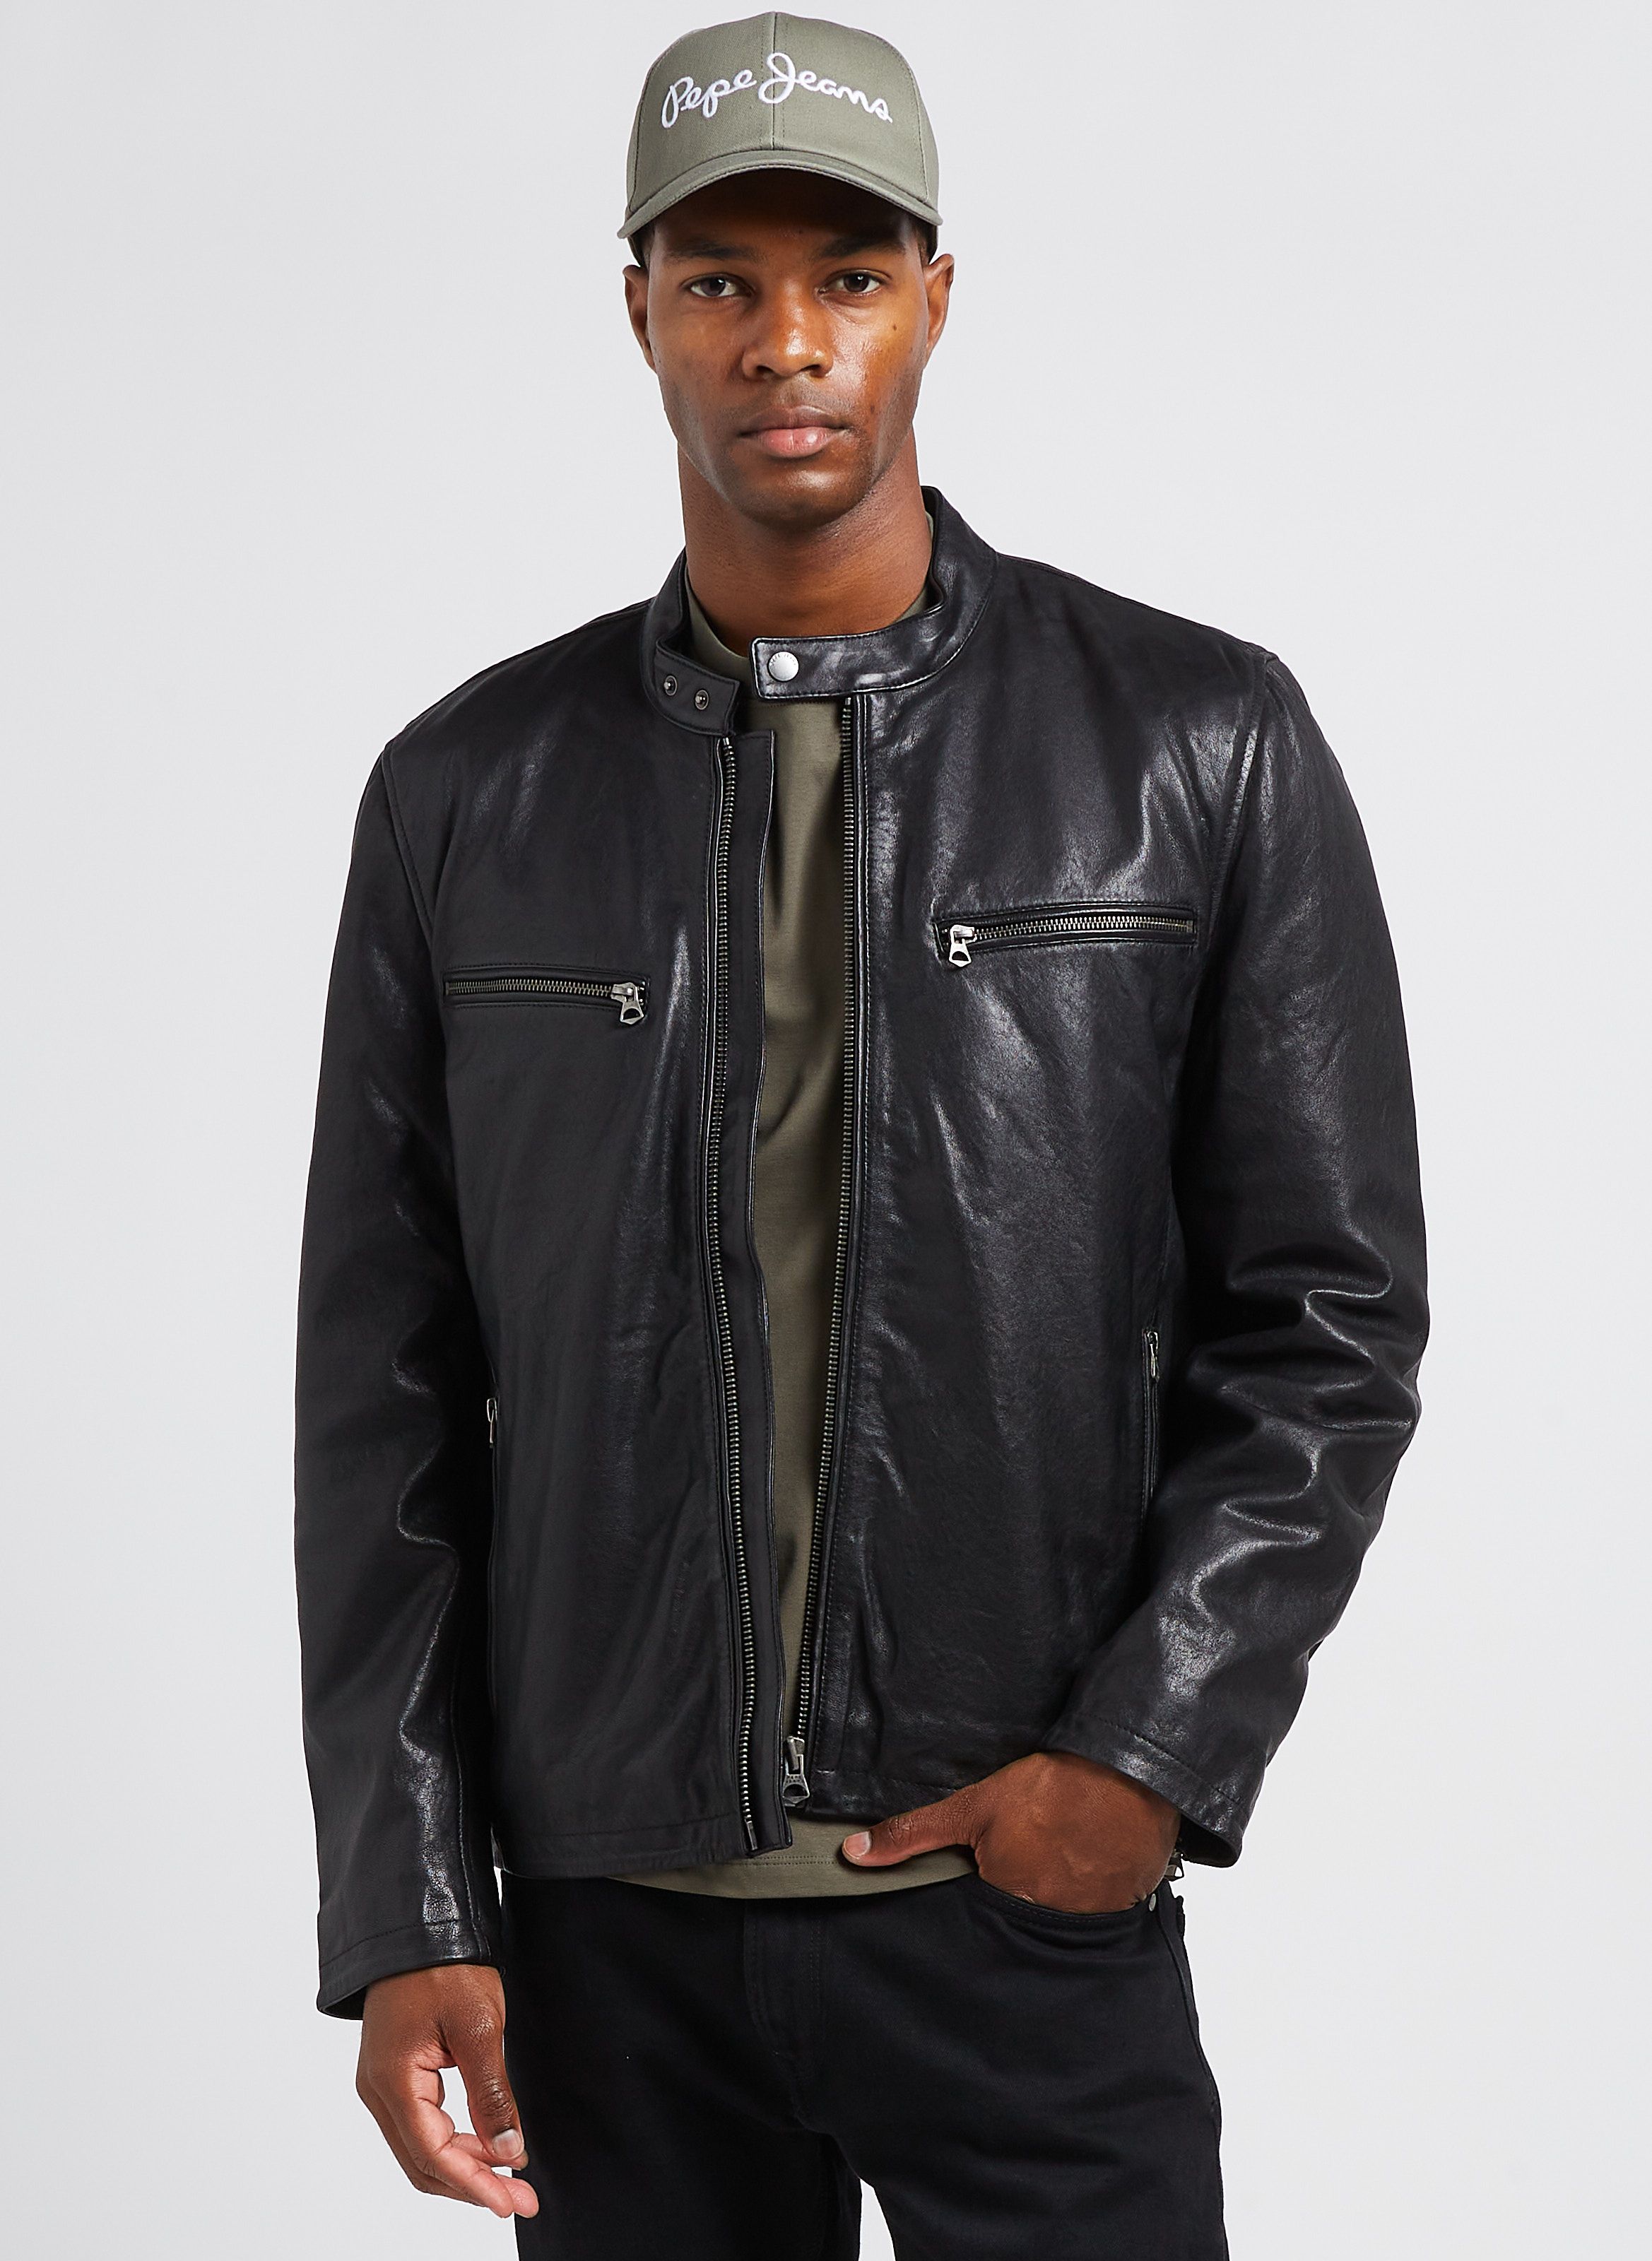 Pepe Jeans leather look skinny trouser with exposed zip | ASOS